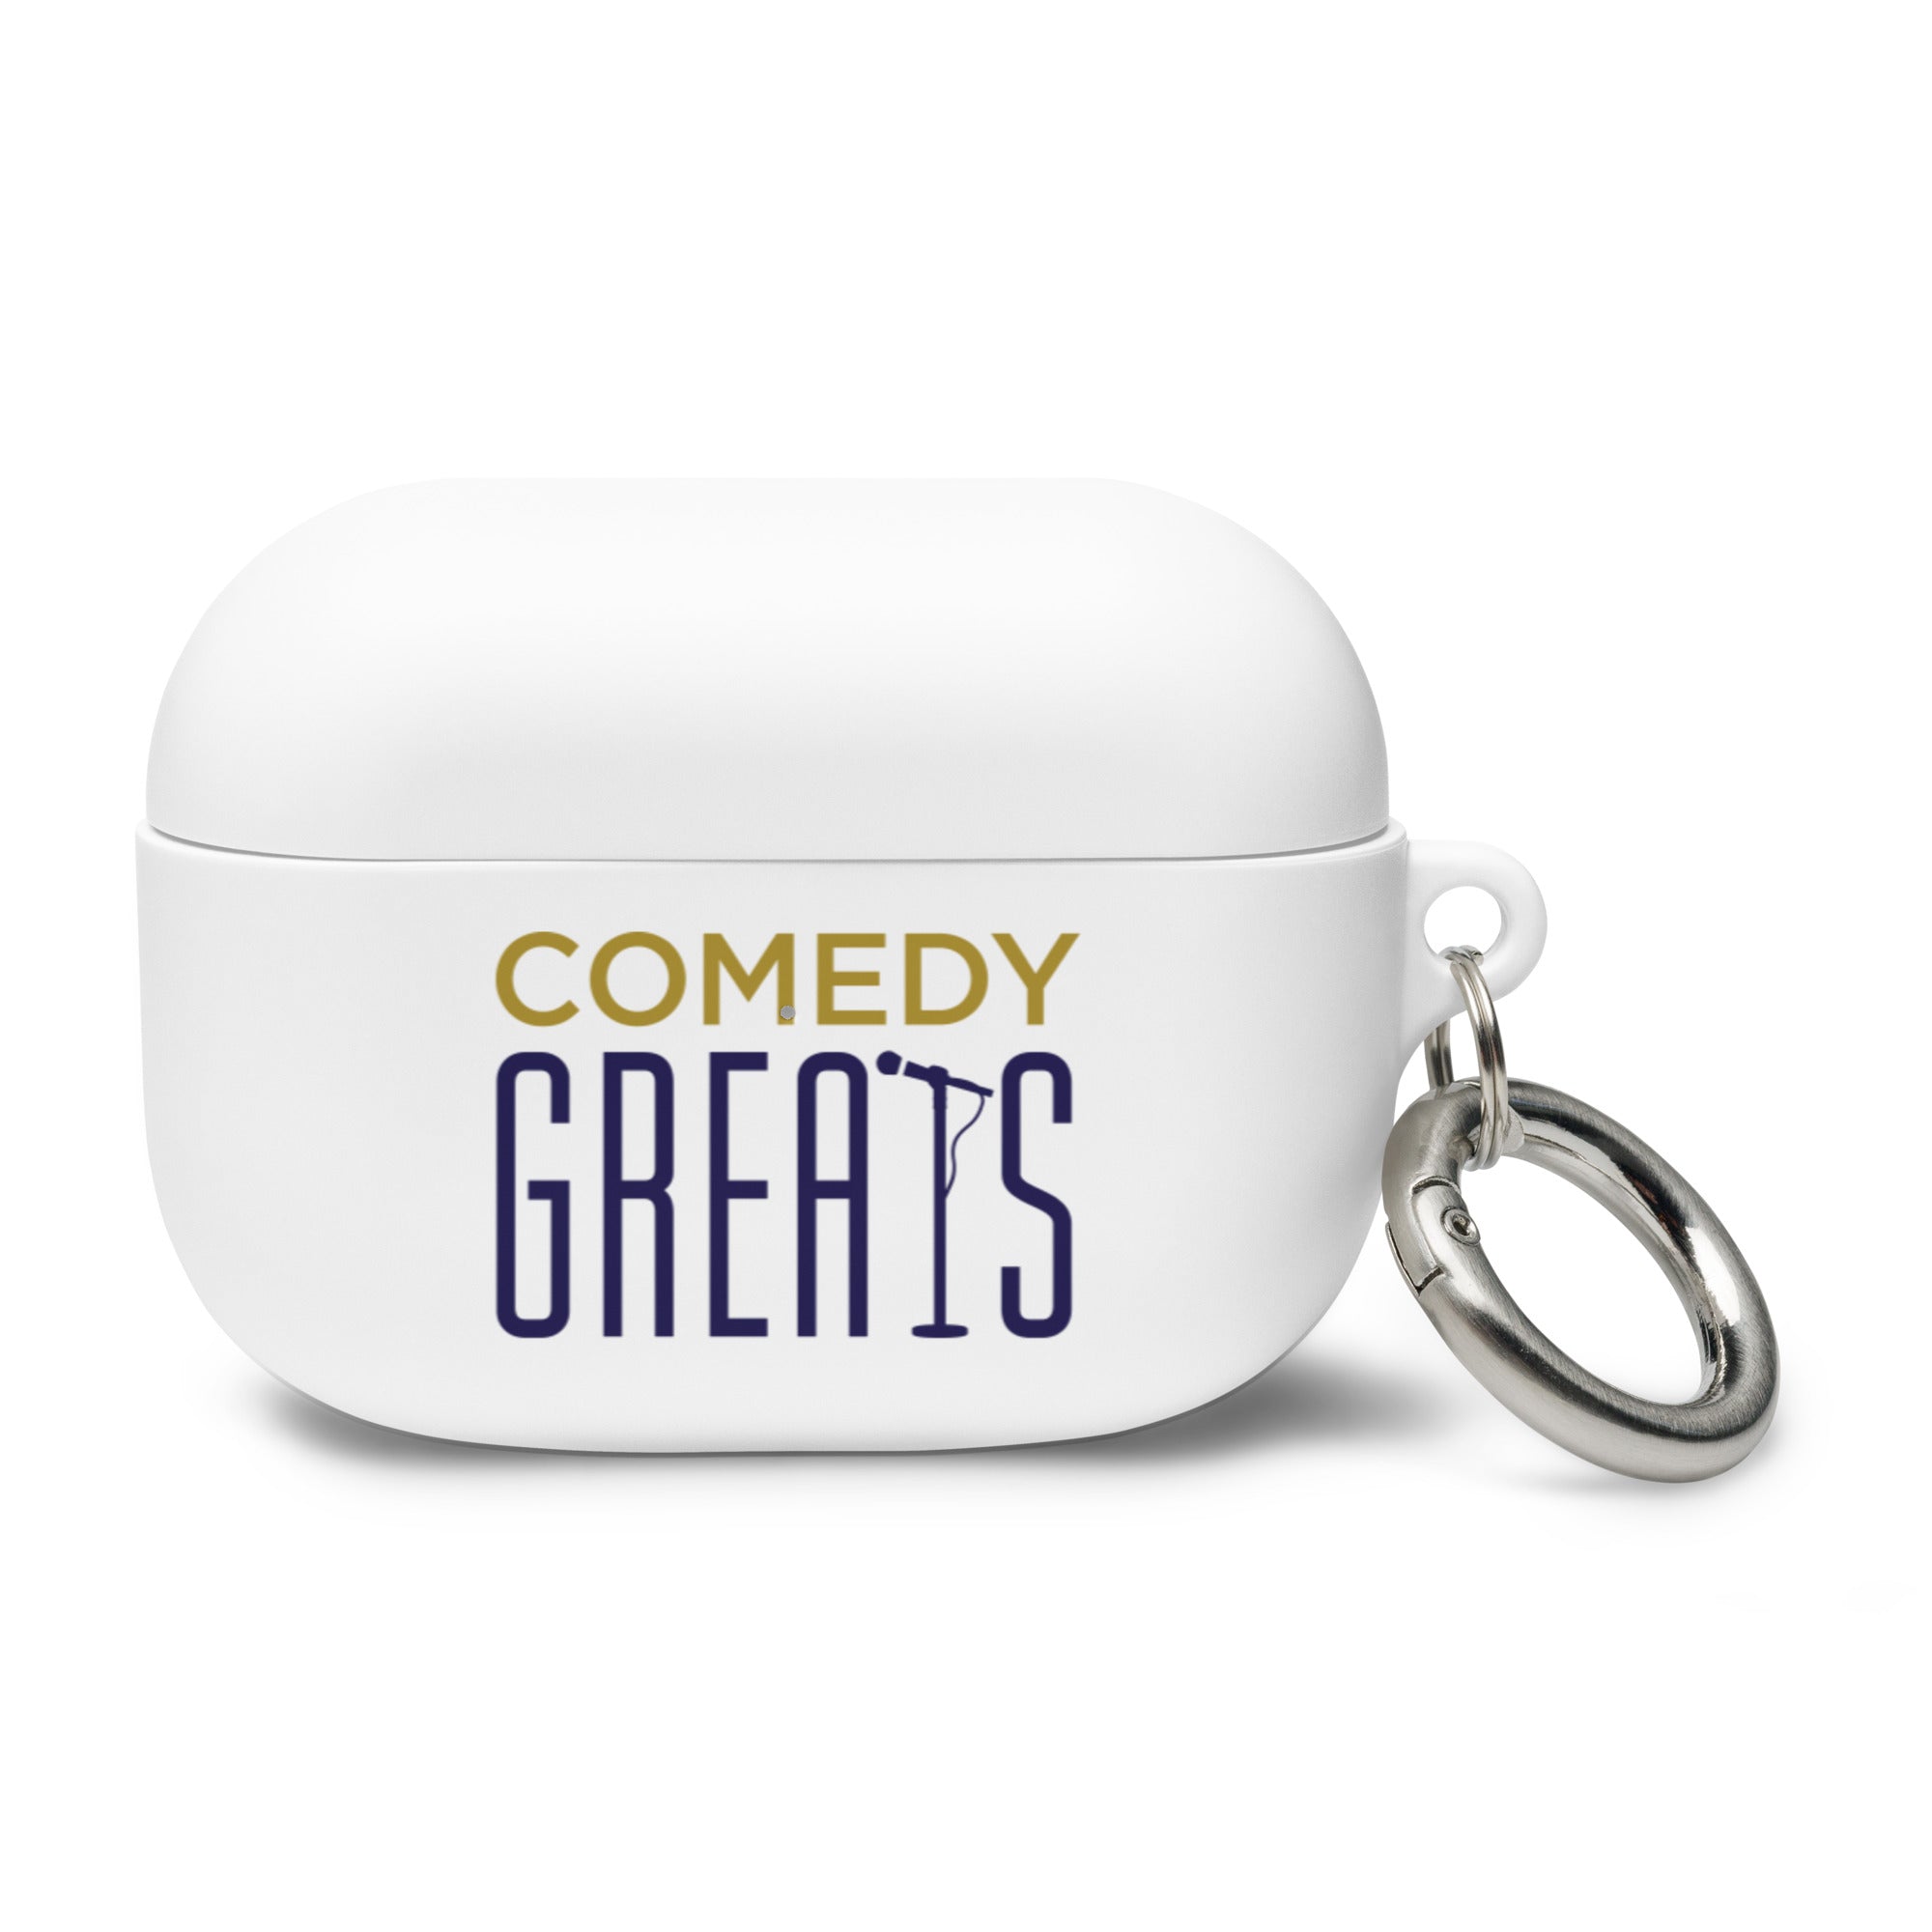 Comedy Greats: AirPods® Case Cover